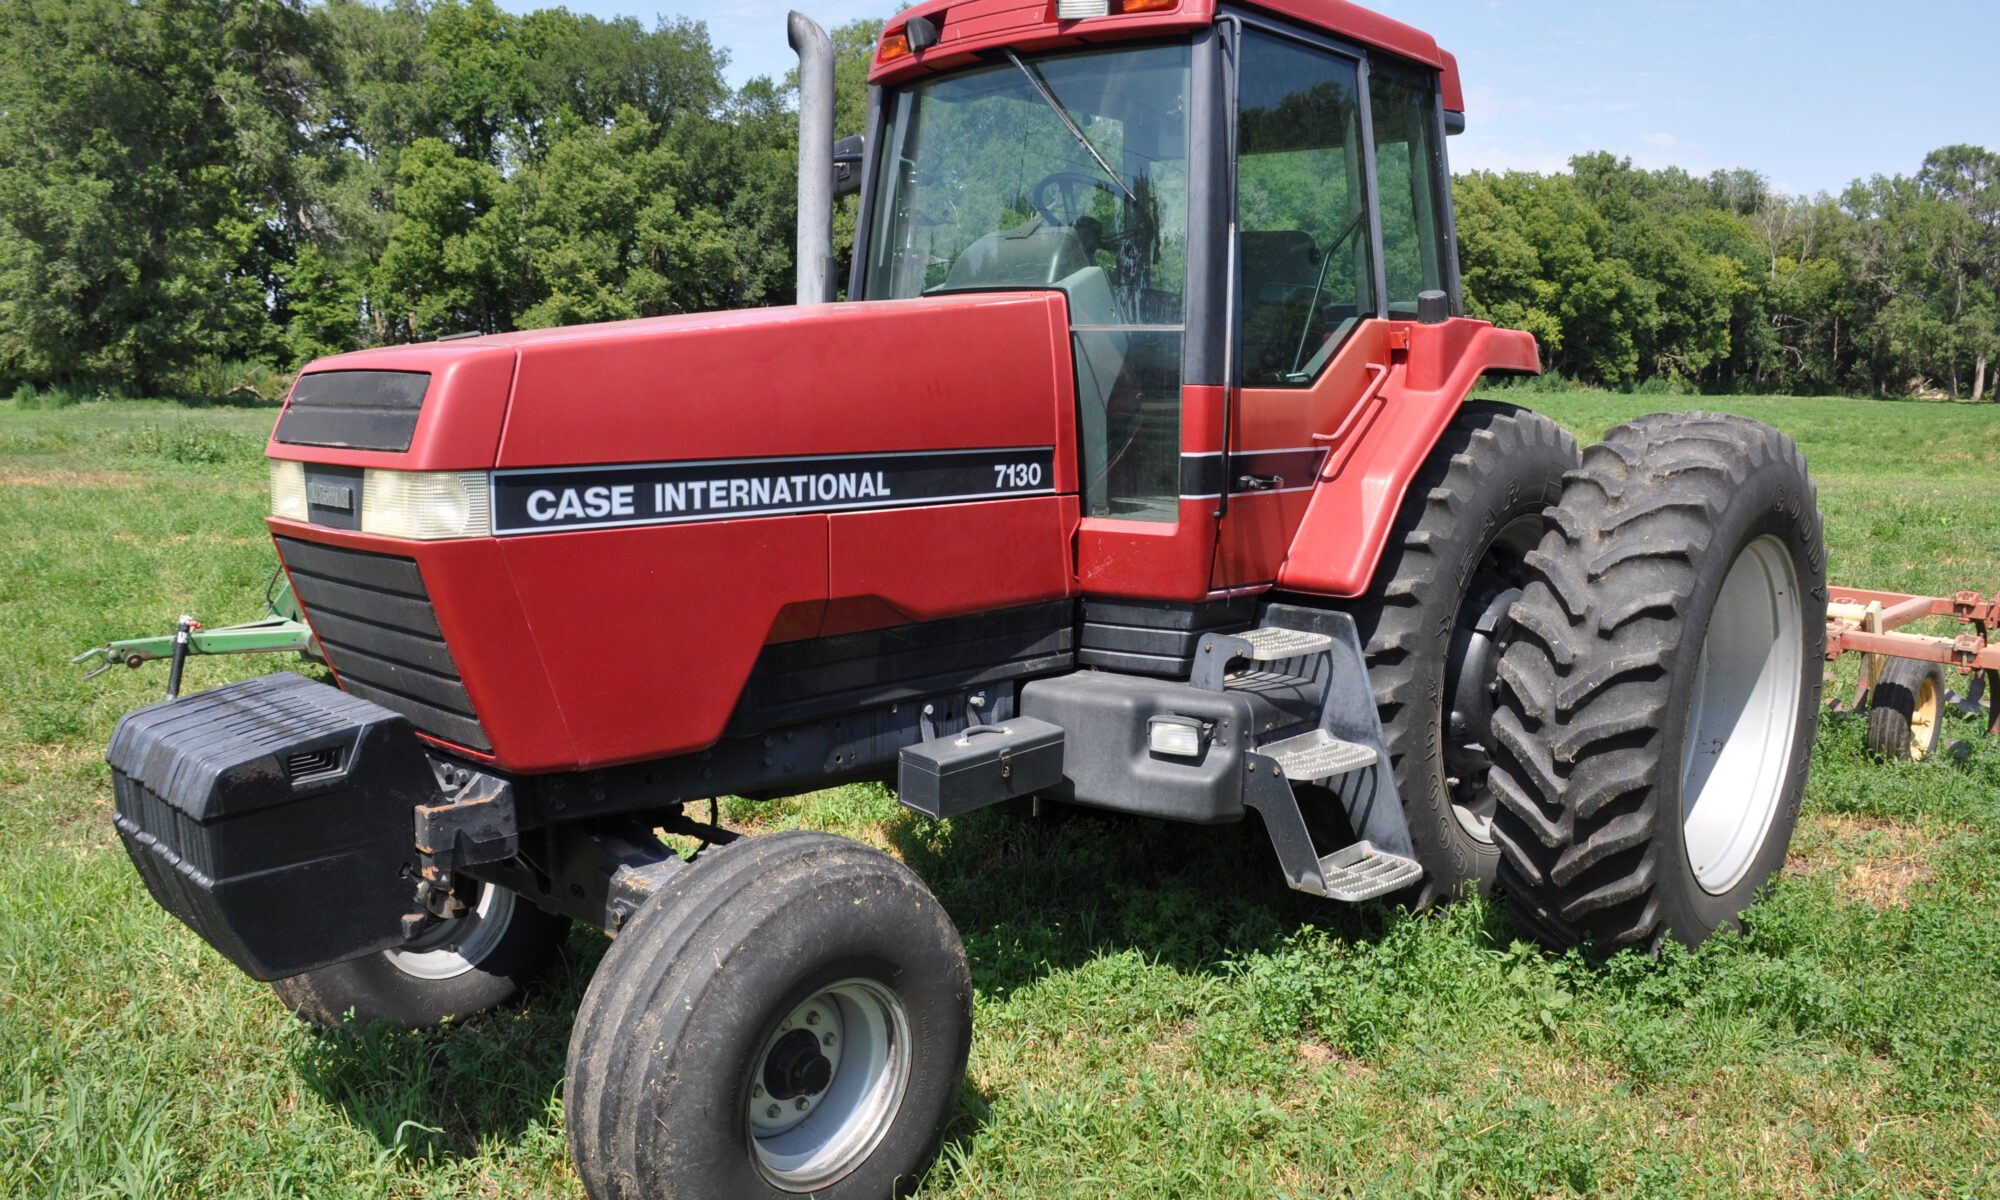 Tractor for sale on online auction